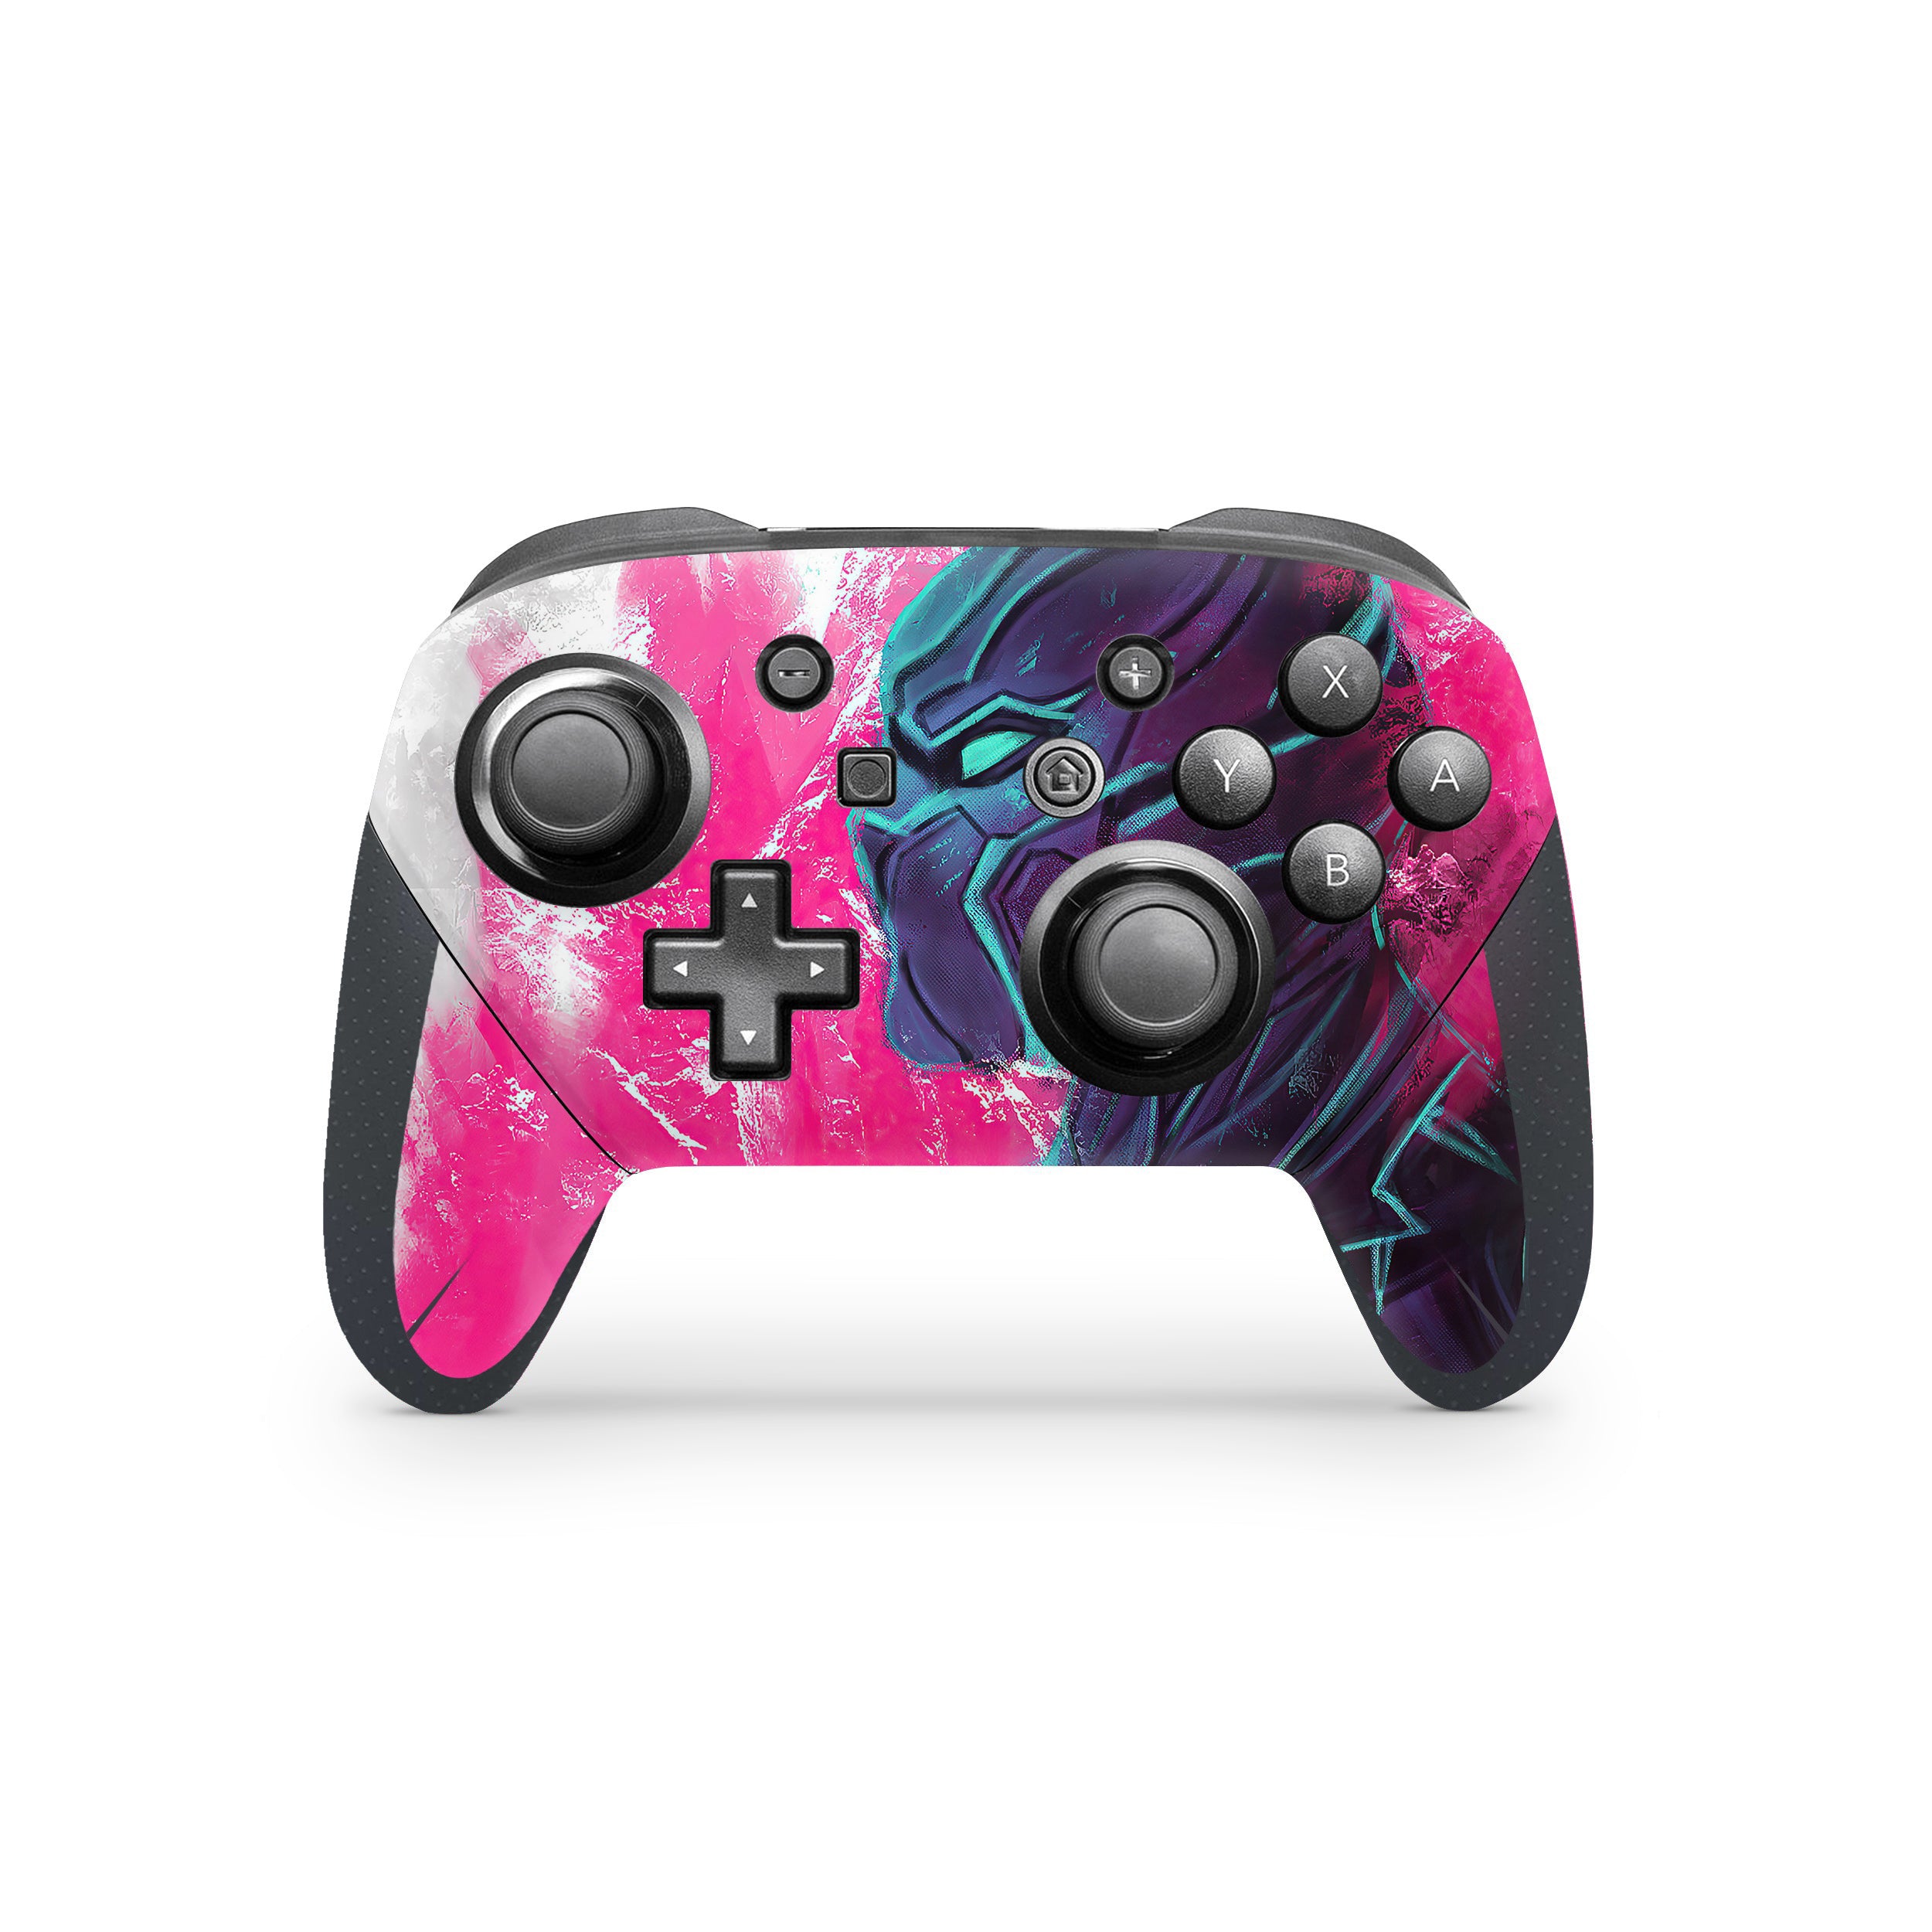 A video game skin featuring a Marvel Comics Black Panther design for the Switch Pro Controller.